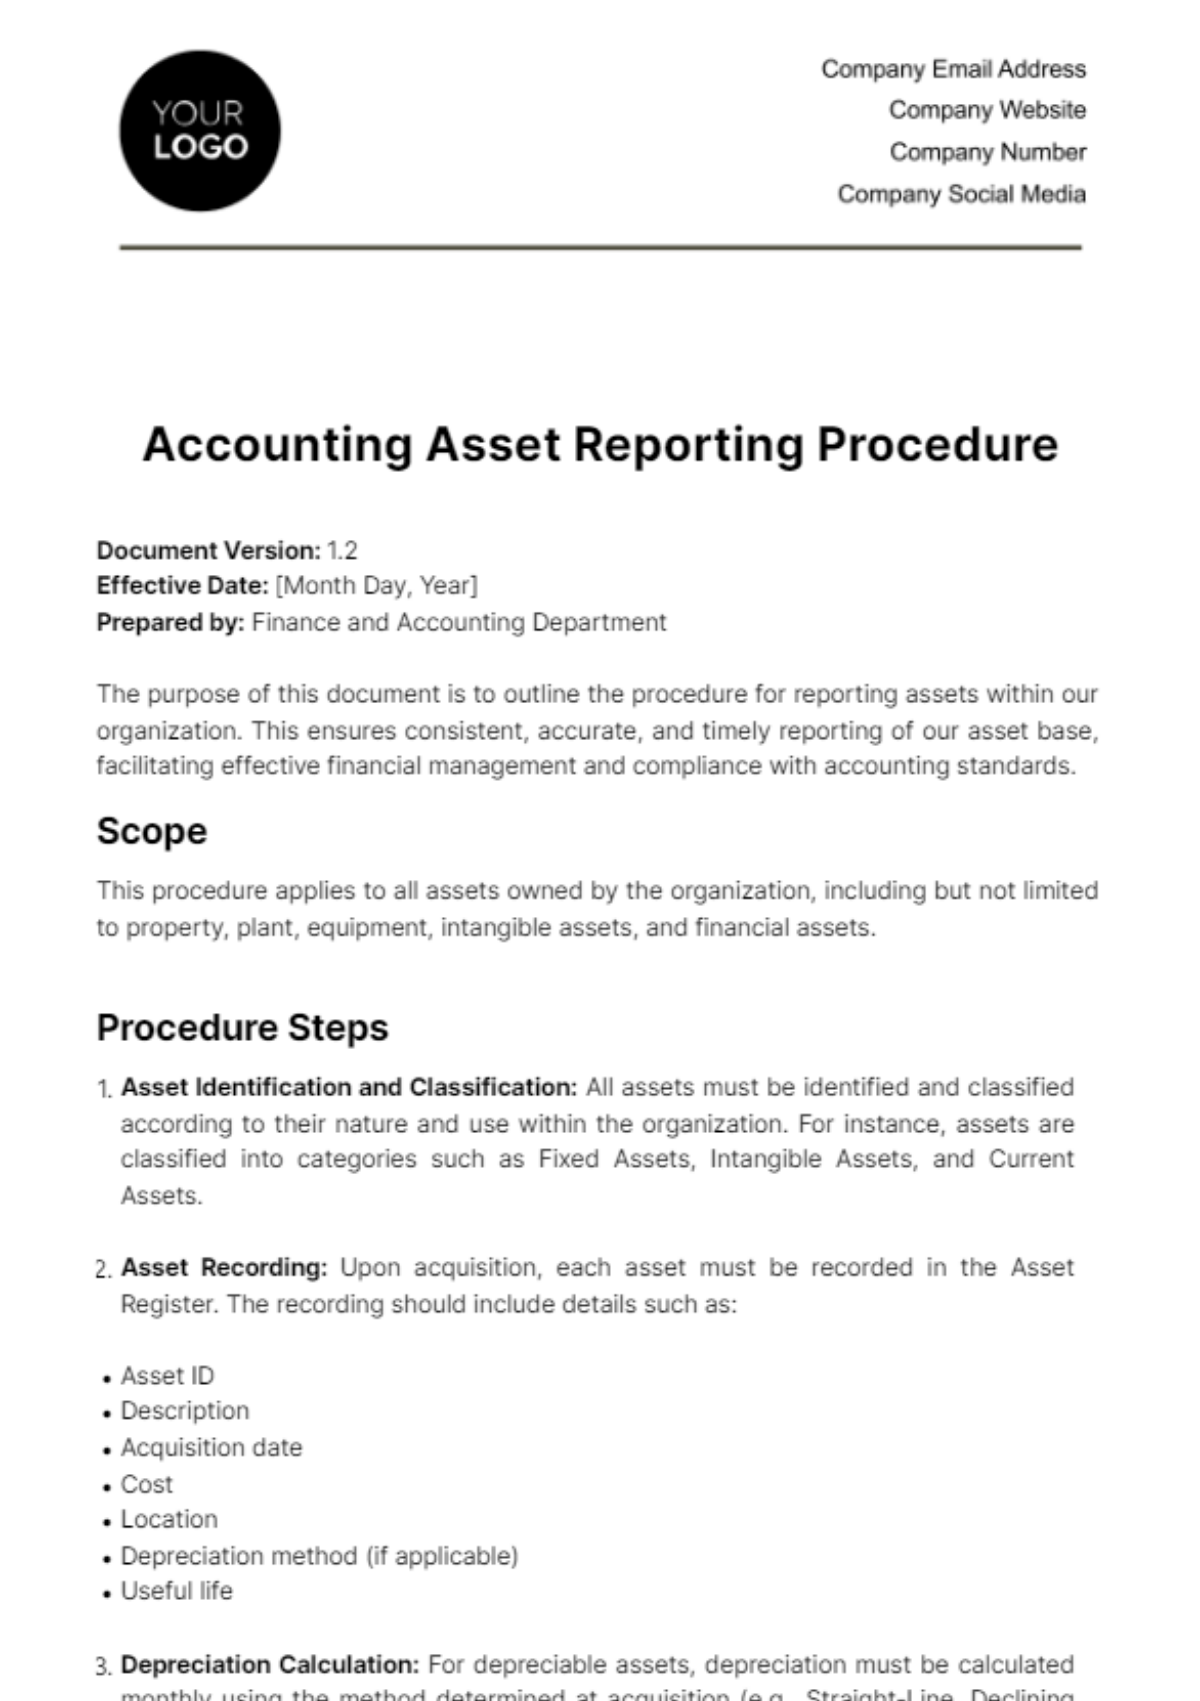 Accounting Asset Reporting Procedure Template